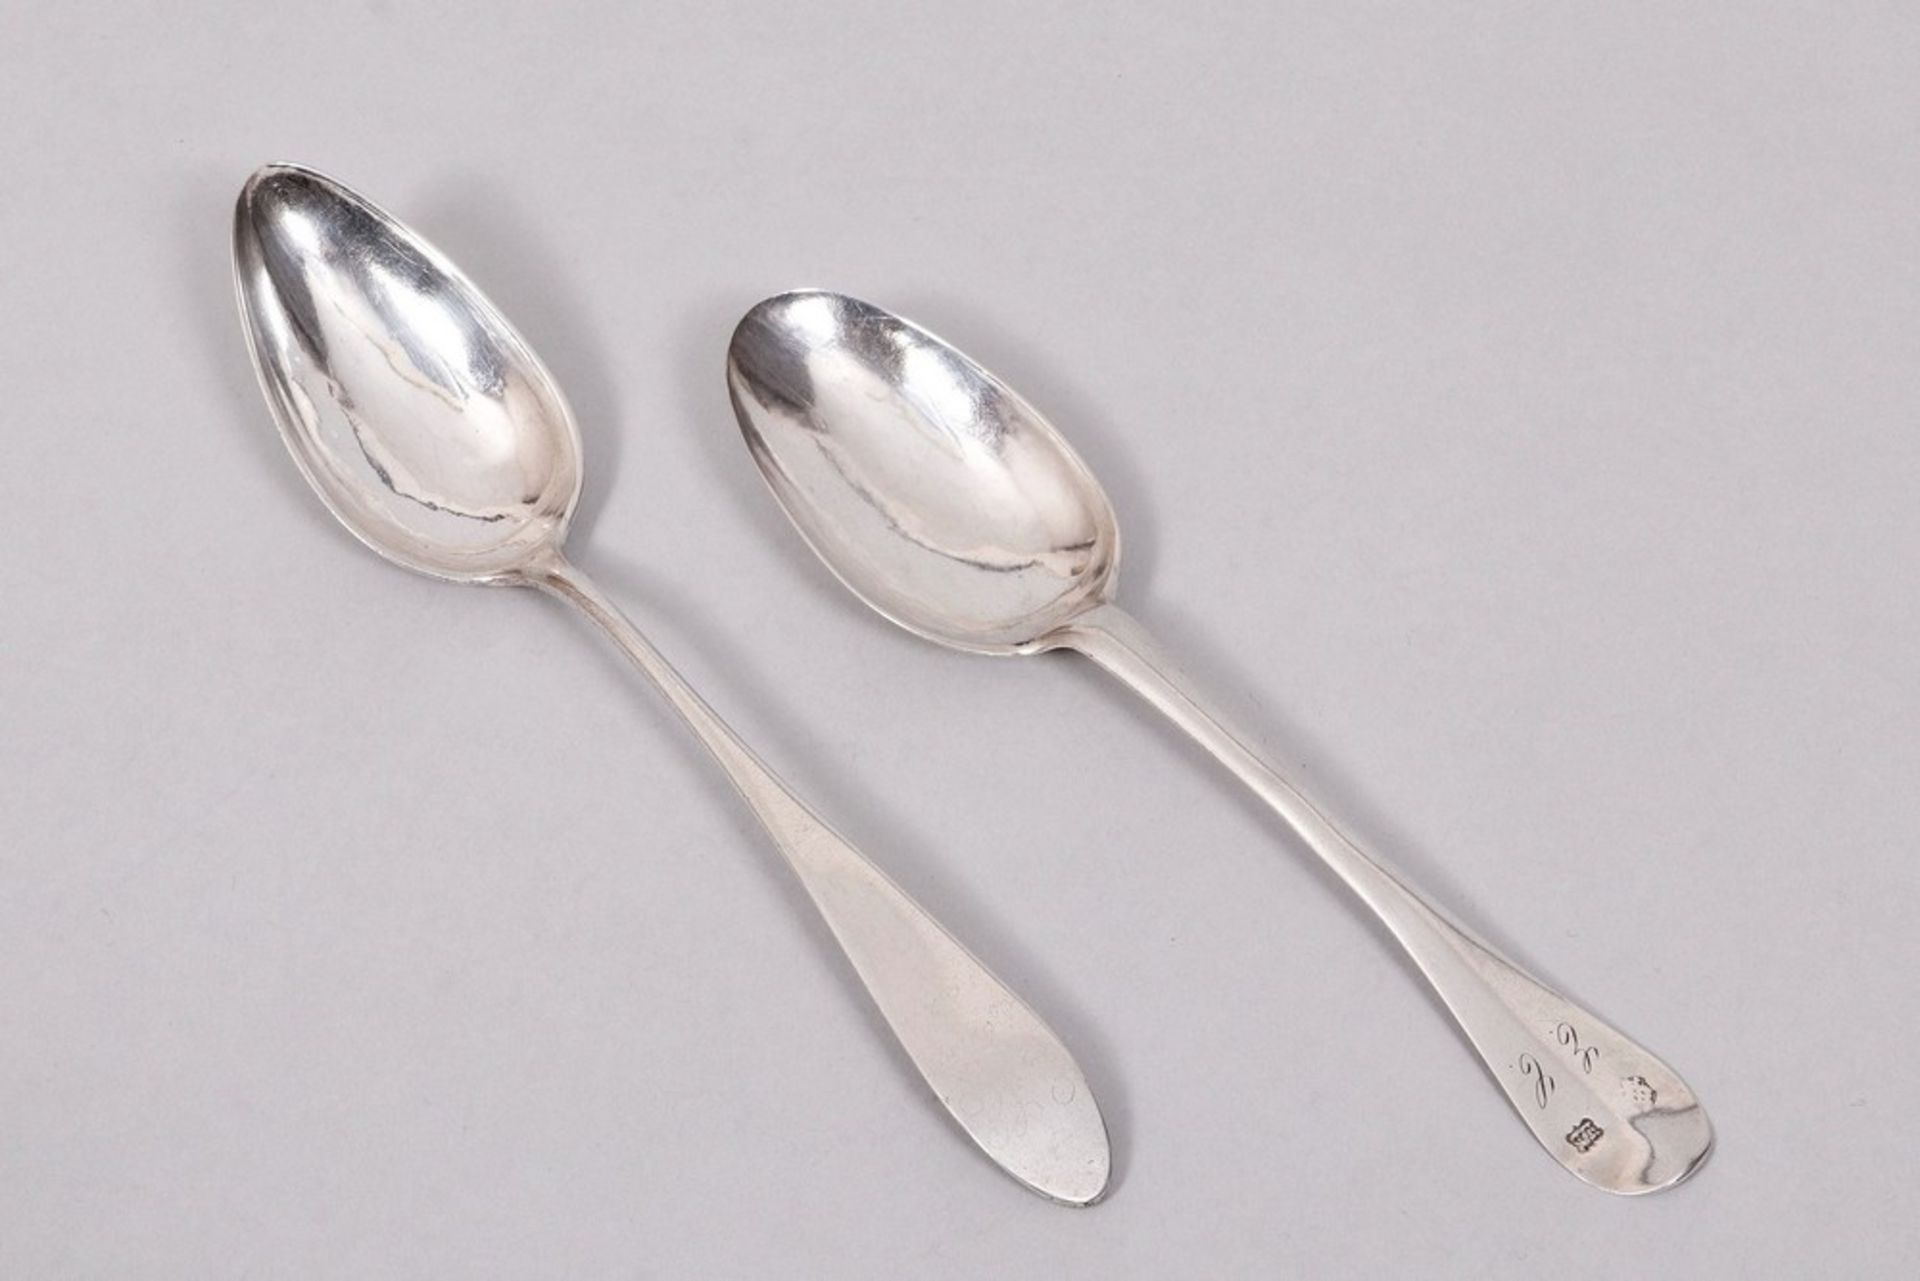 2 dining spoons, silver, including Friedrich August Heyne, Lübeck, late 18th C./1800